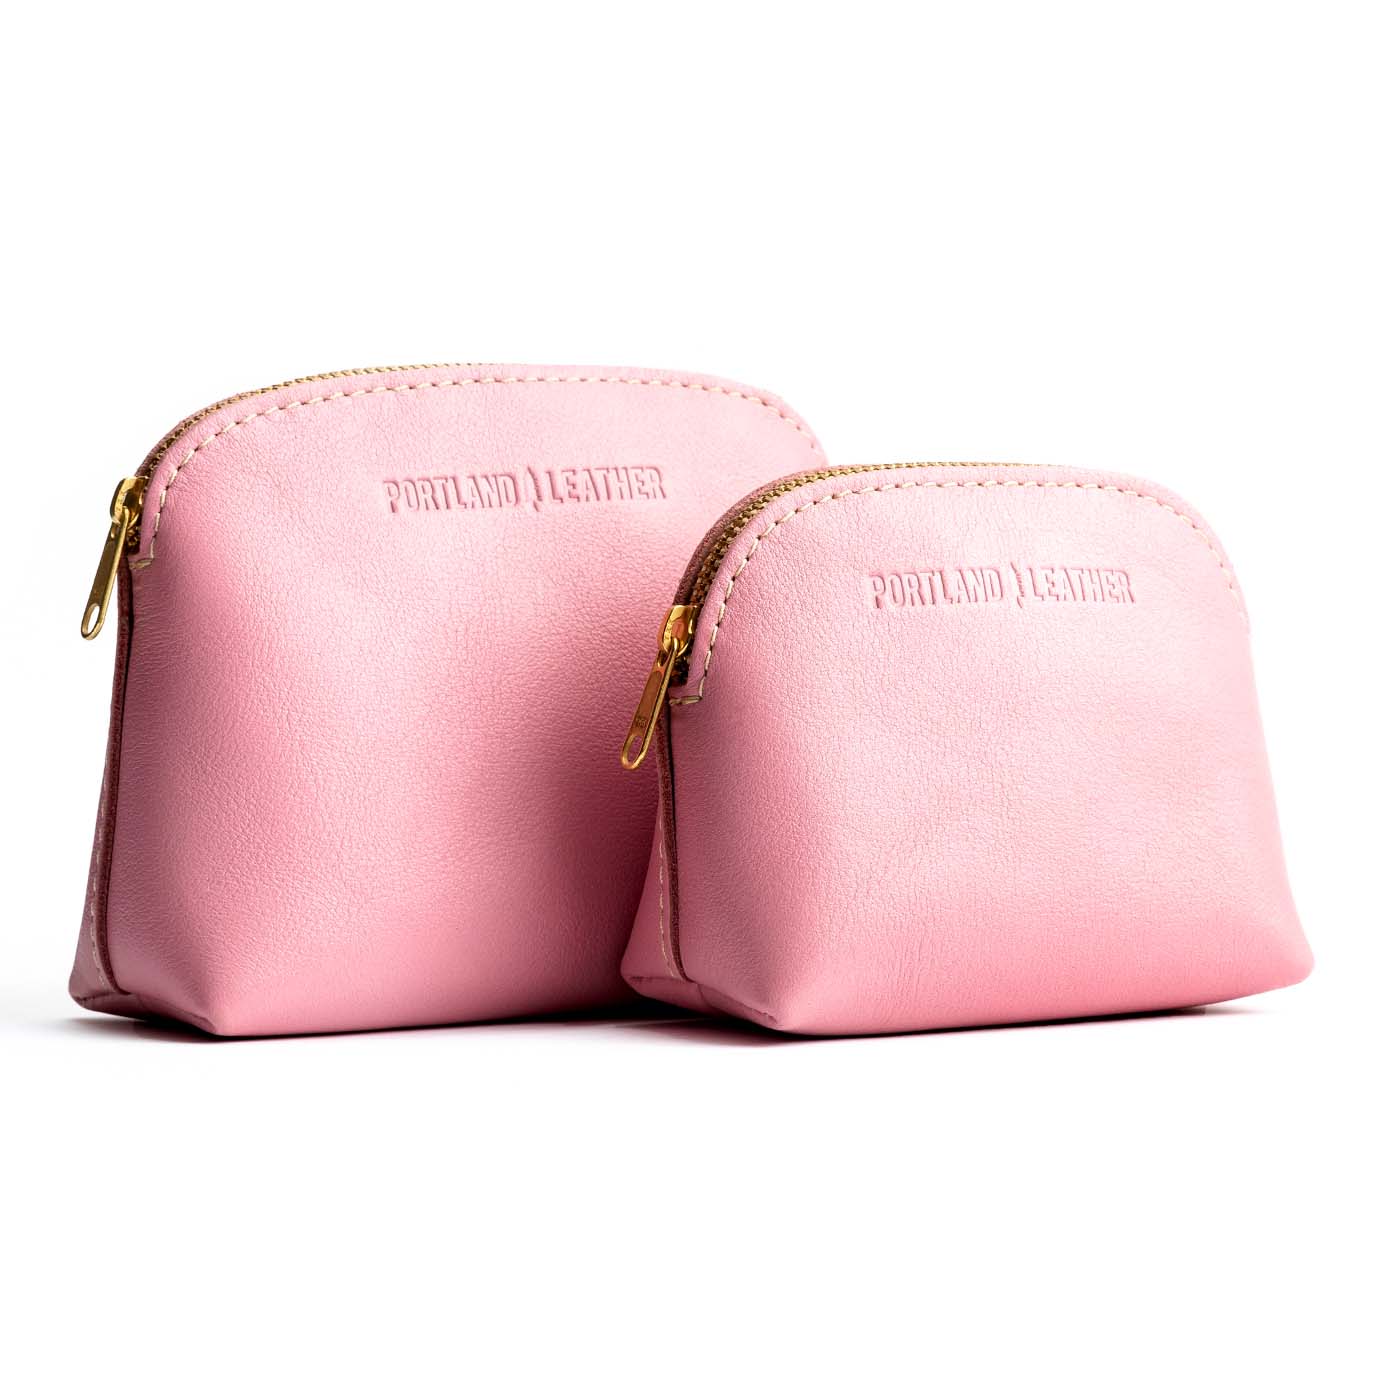 All Color: Vintage Pink | Compact leather pouch with top zipper